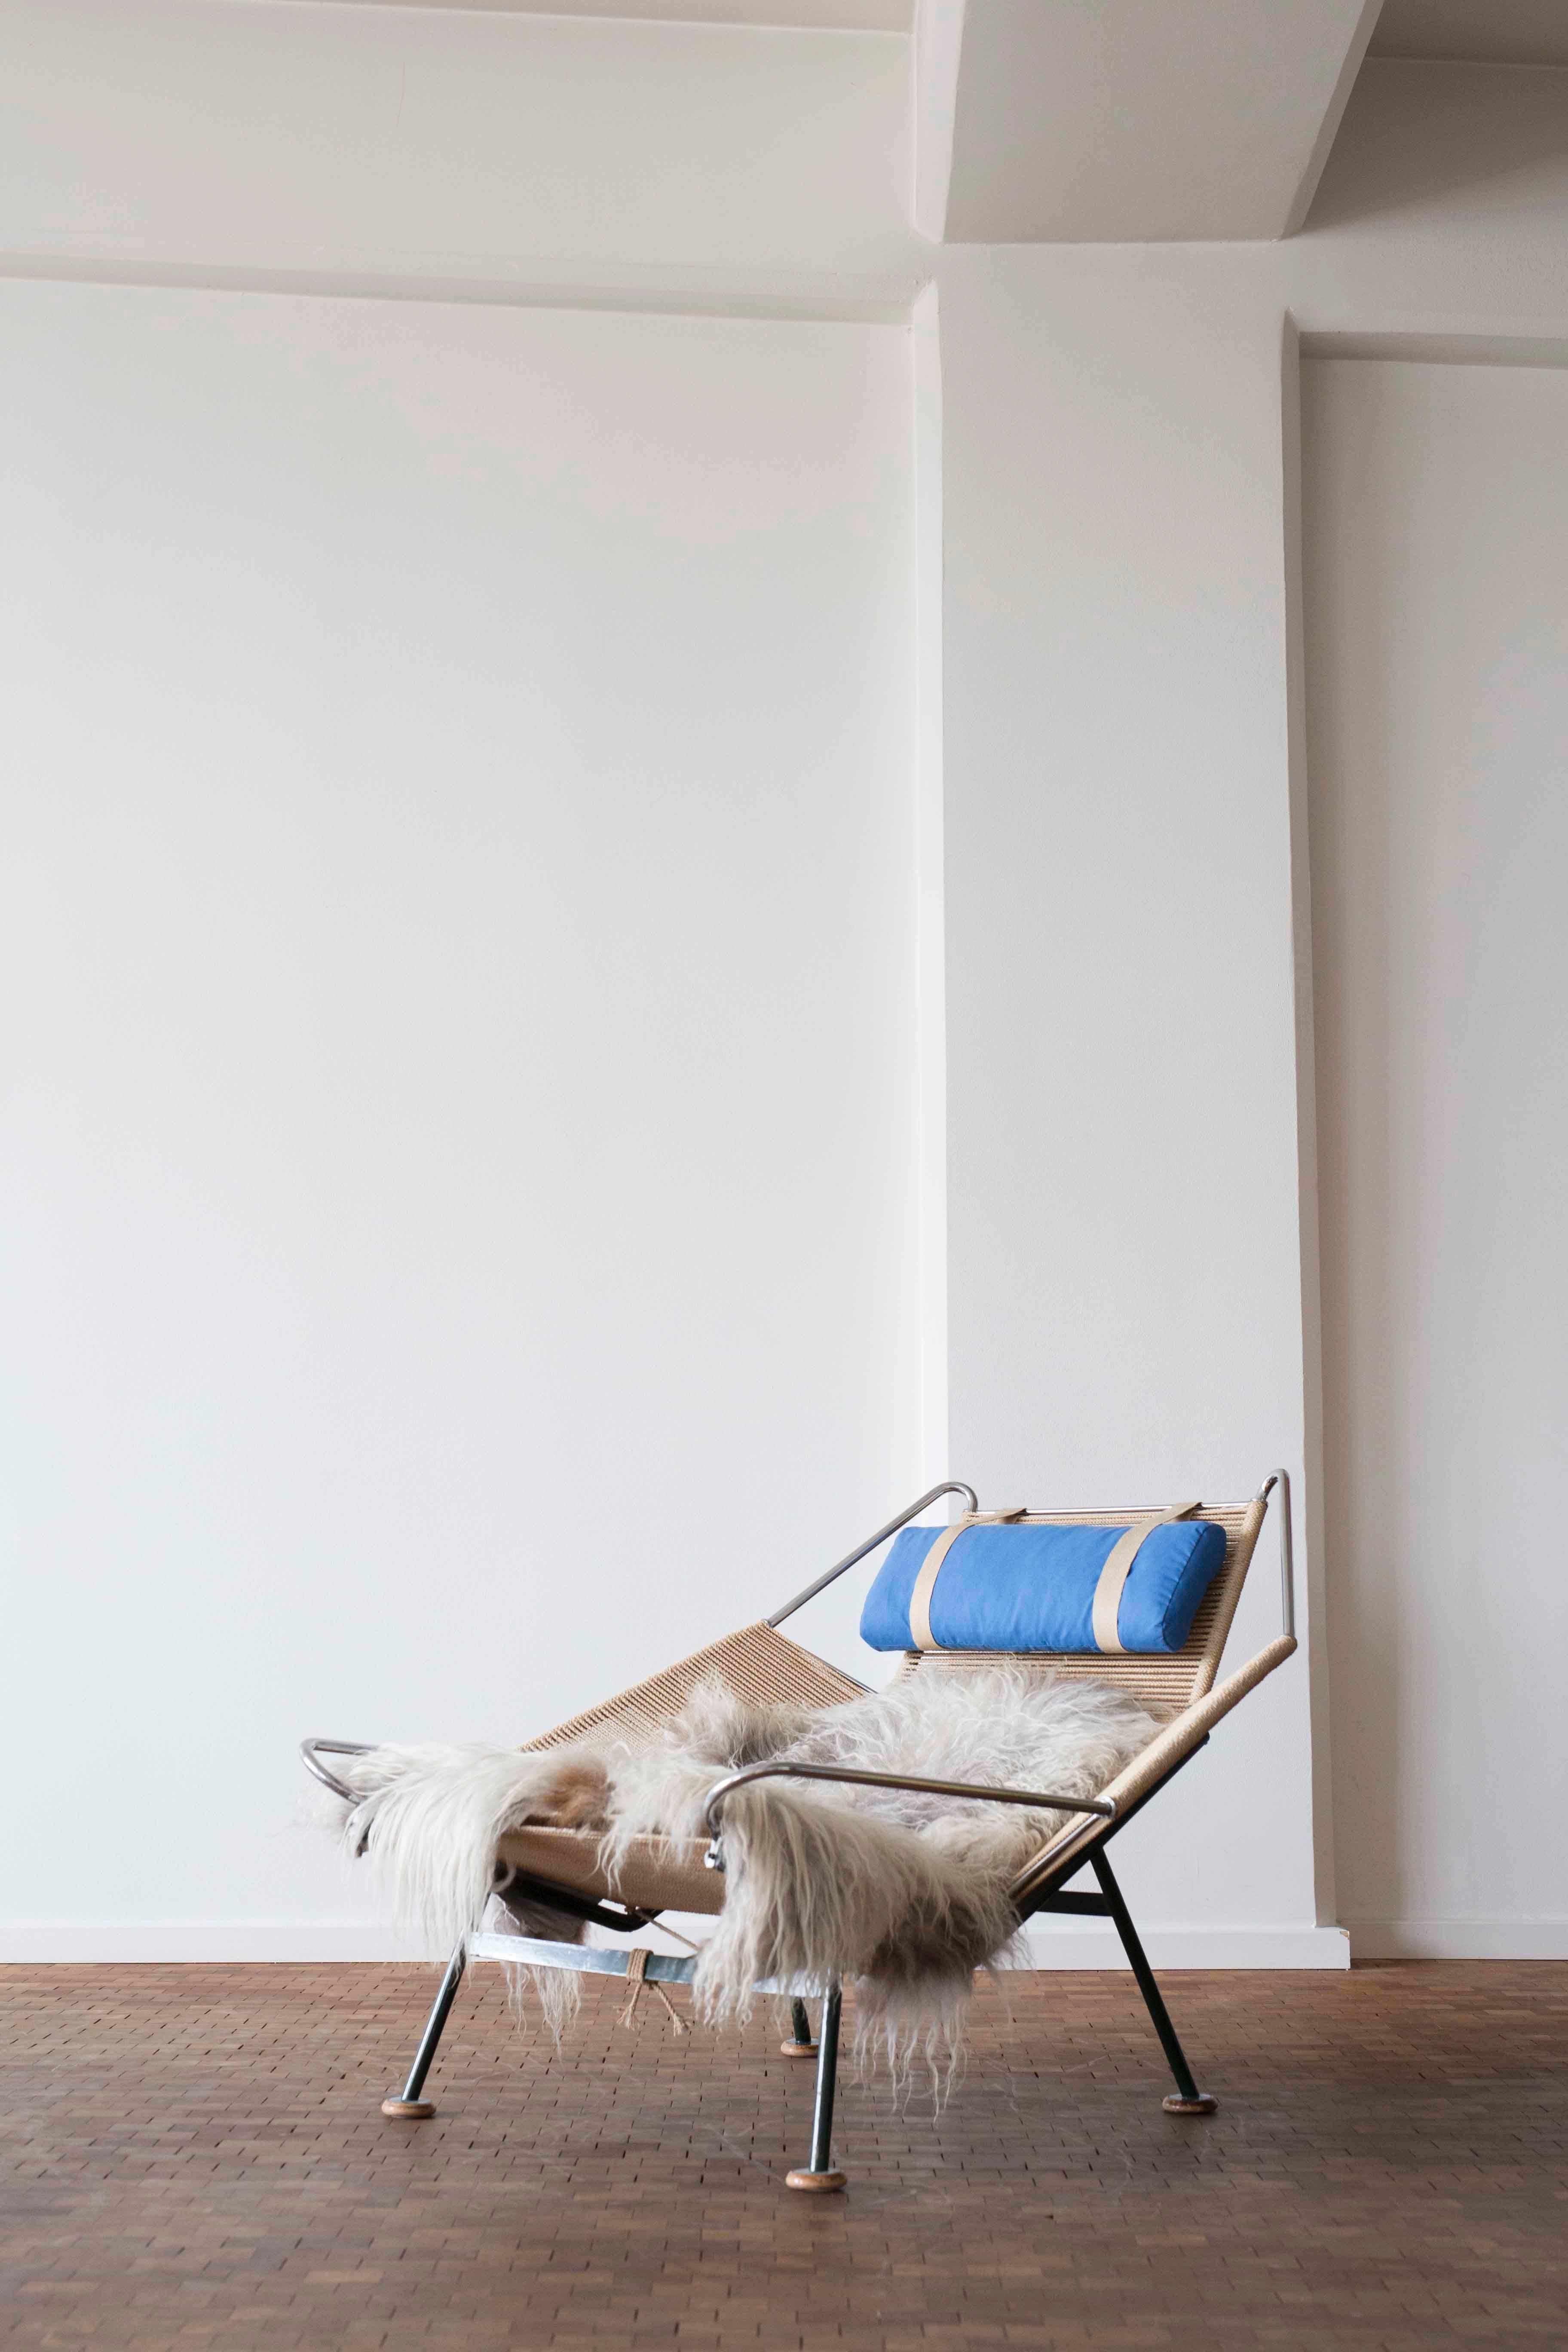 Hans J. Wegner flag Halyard easy chair with original green steel frame, wooden beech shoes and blue neck cushion. 

Designed by Hans J. Wegner in 1950 and manufactured by Getama, Denmark, model GE225, early 1950s. 
